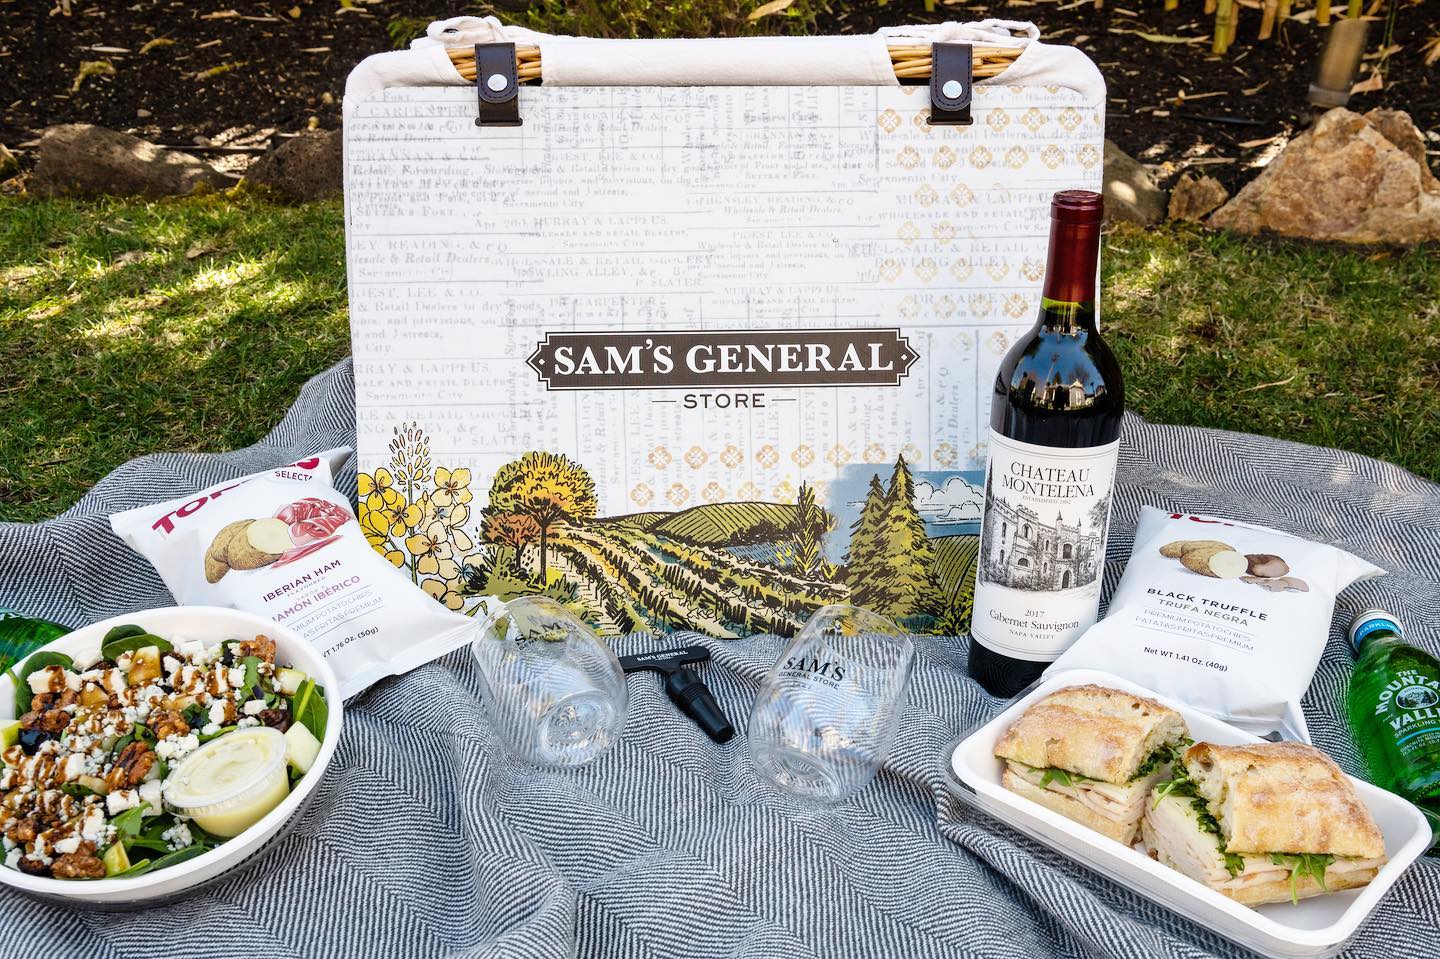 A picnic basket featuring sandwiches, salads, cookies and a bottle of wine set up on a blanket outside